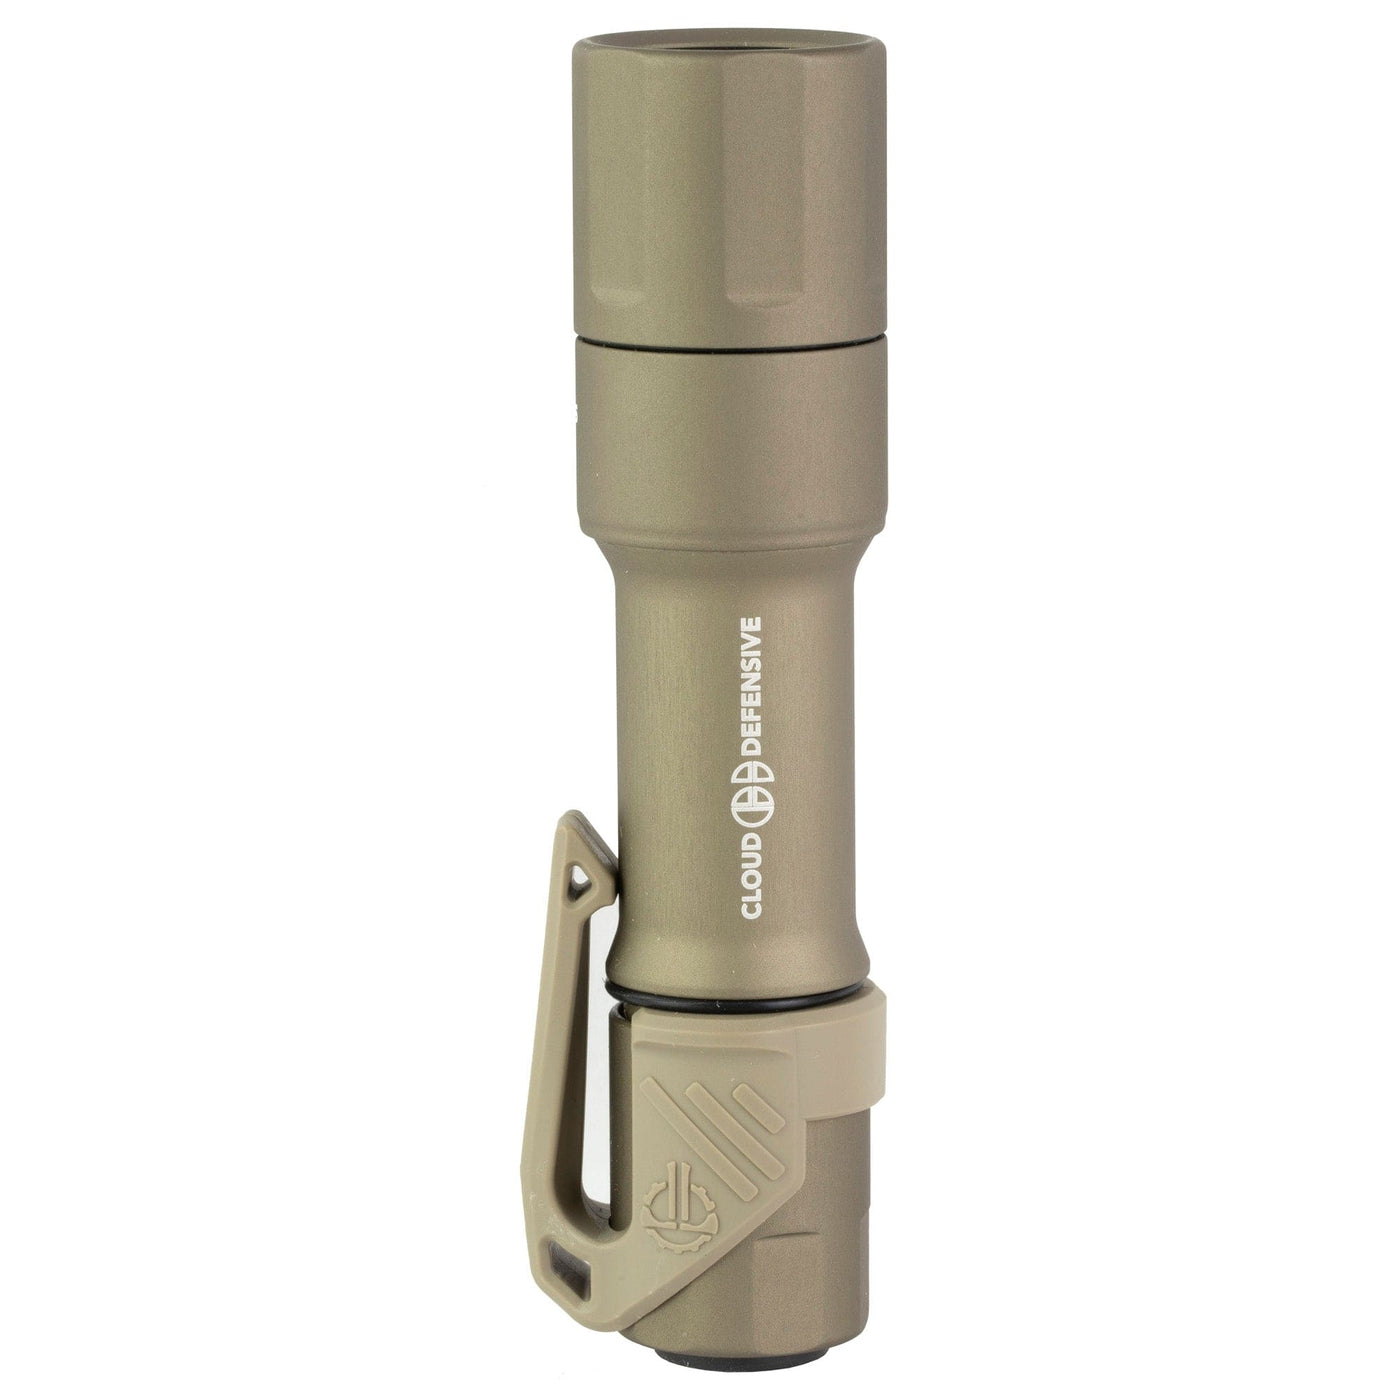 Cloud Defensive Cloud Defensive Mch Edc Light - W/pocket Clip W/battery Fde Flat dark earth Lights And Accessories